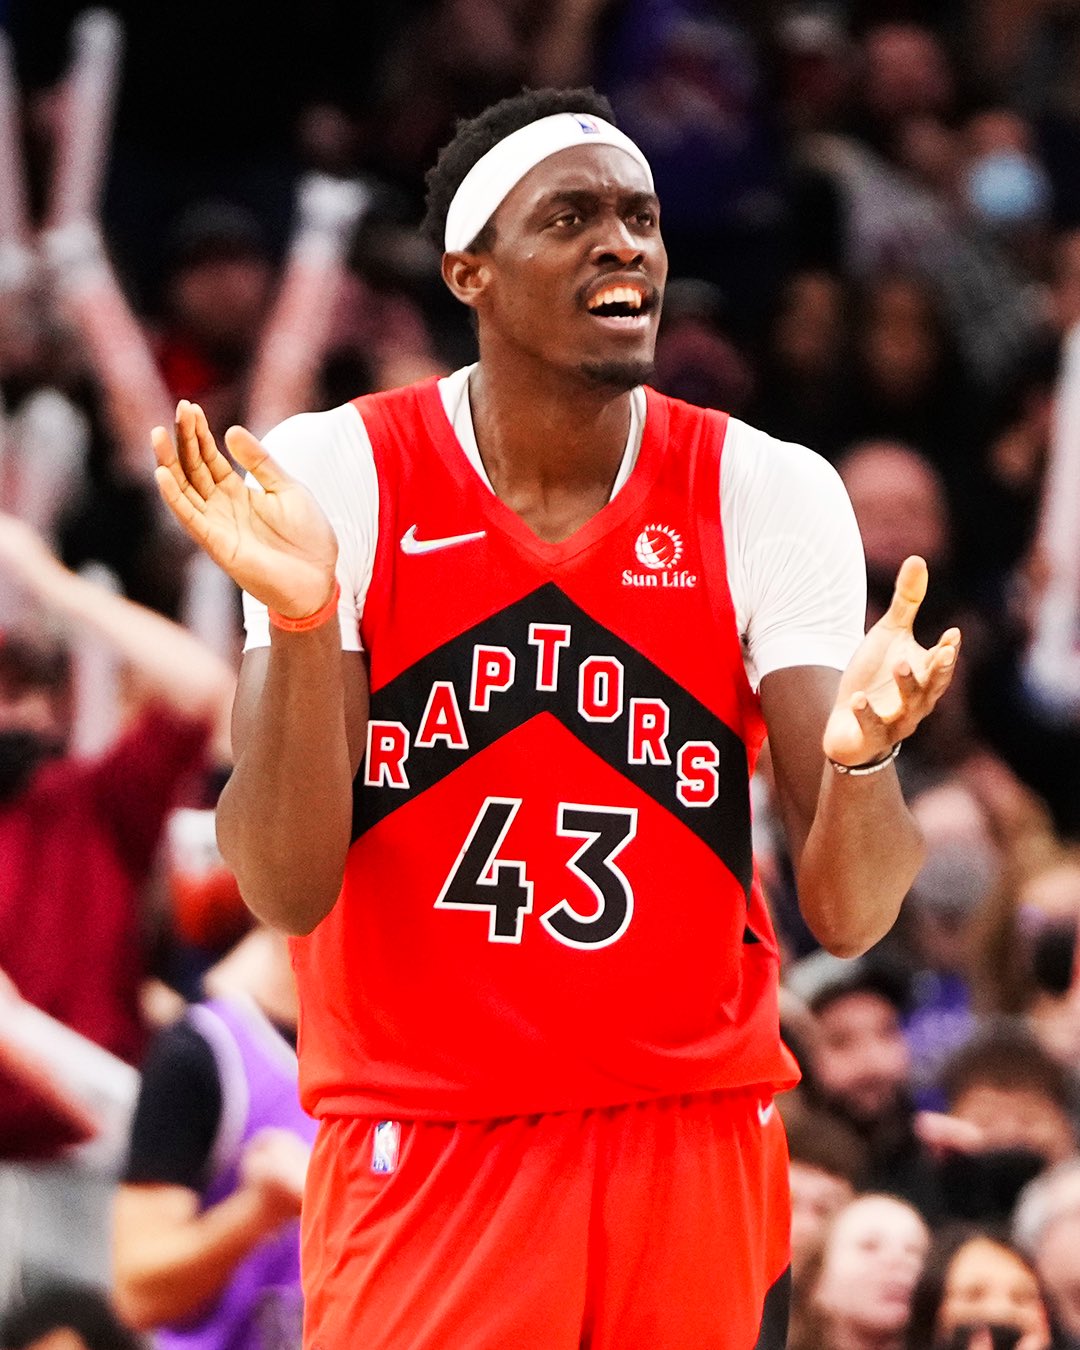 Pascal Siakam Girlfriend: Is He Dating Anyone? Details About His Personal Life And Net Worth